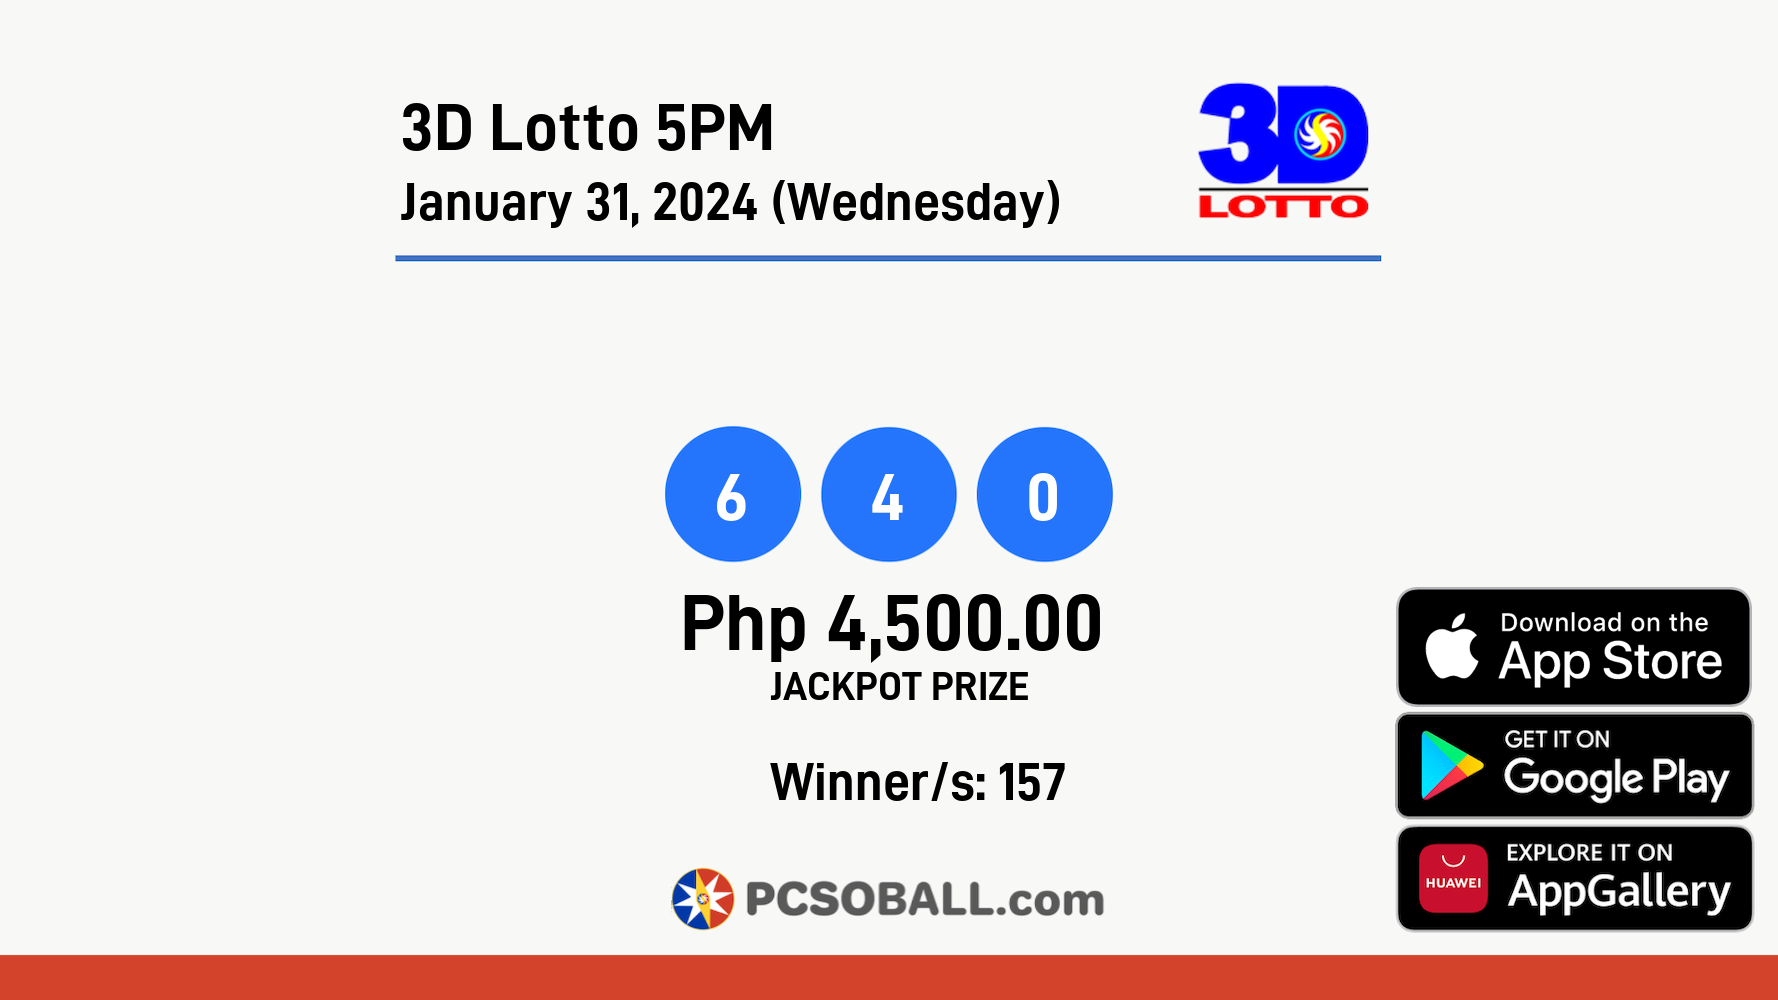 3D Lotto 5PM January 31, 2024 (Wednesday) Result